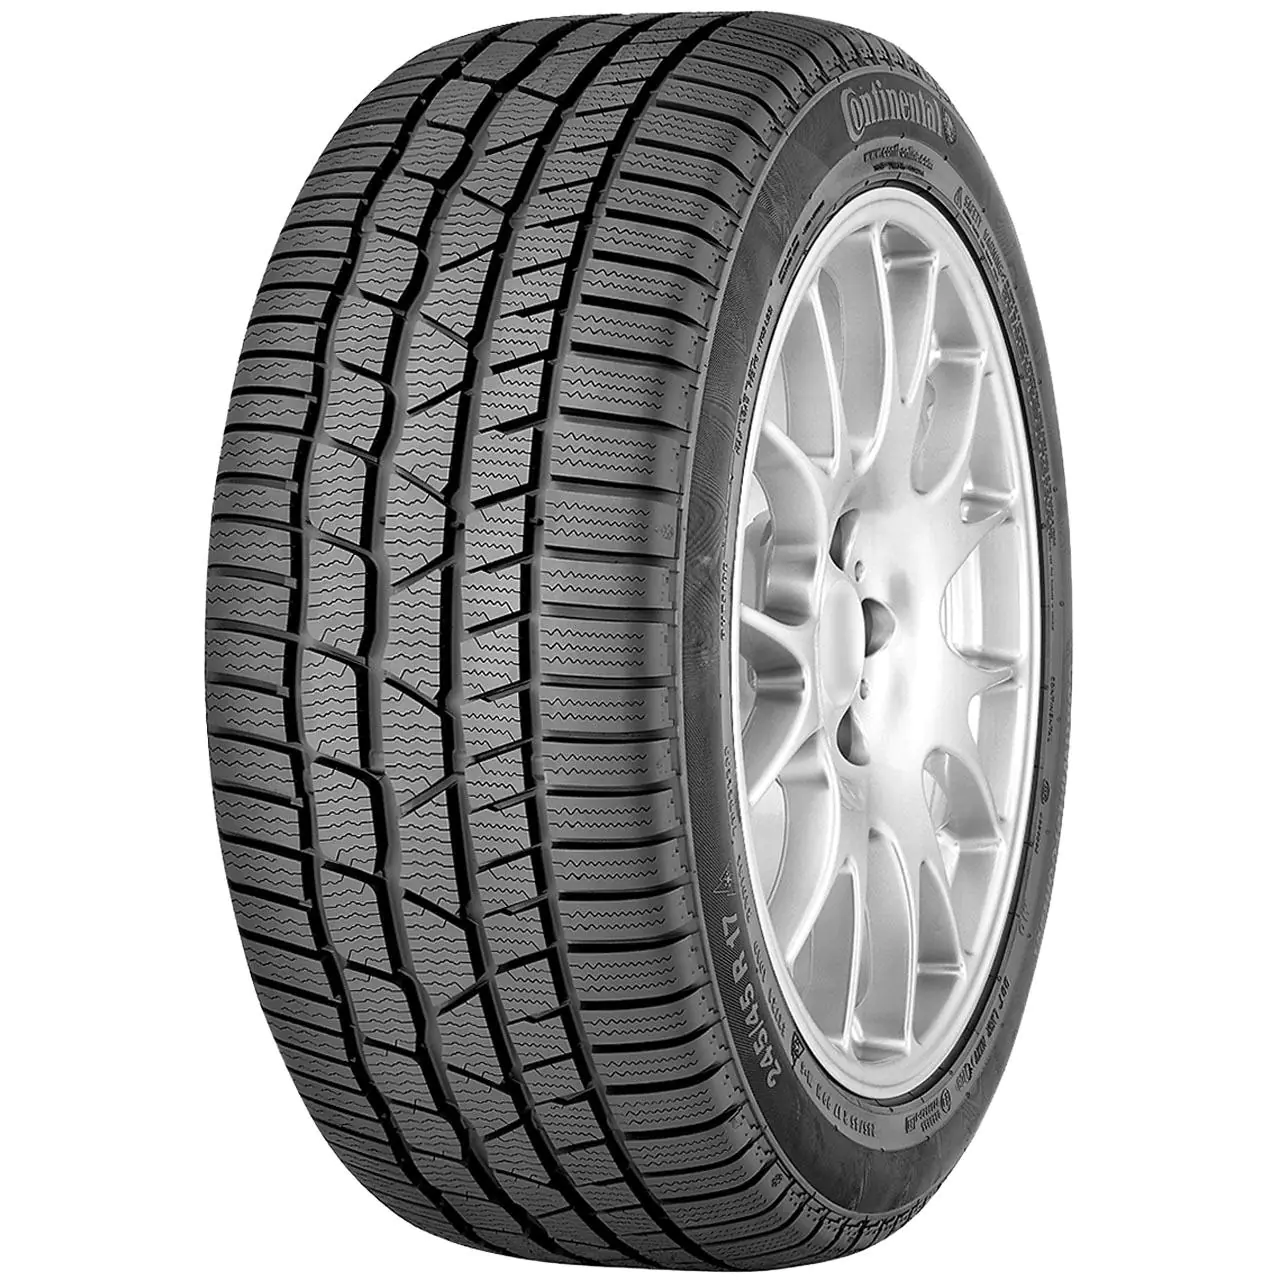 Continental Continental 255/50 R21 109H ContiWinterContact TS830 P ContiSeal FR XL pneumatici nuovi Invernale 